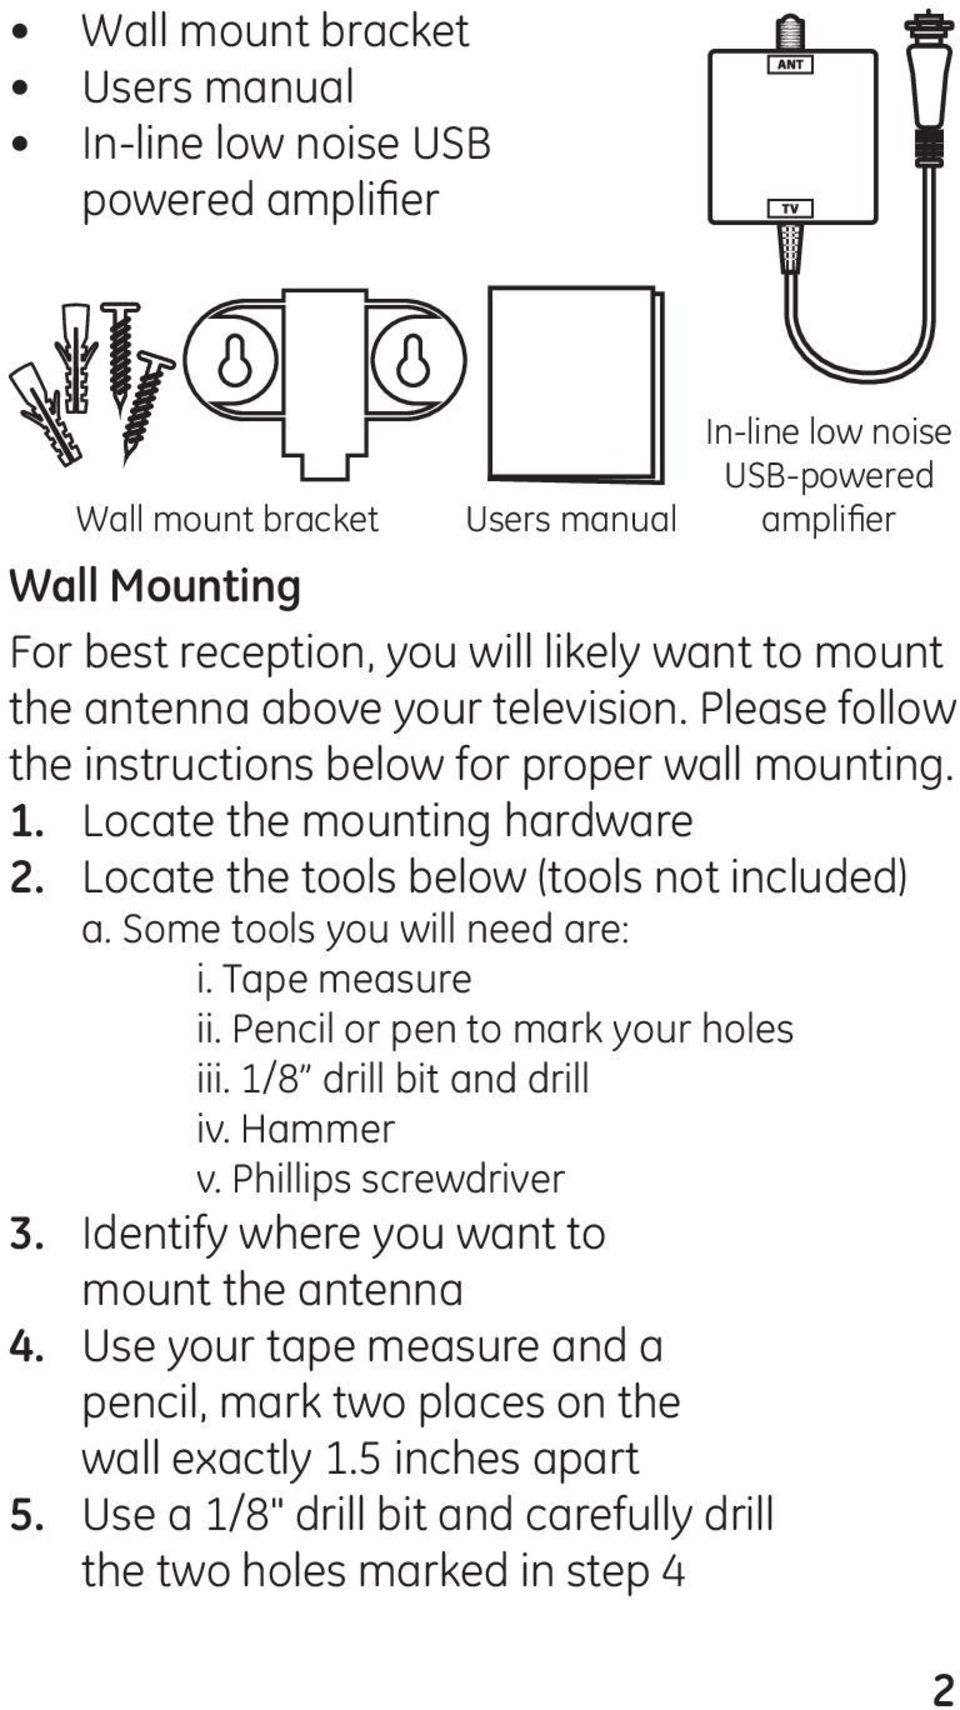 Locate the tools below (tools not included) a. Some tools you will need are: i. Tape measure ii. Pencil or pen to mark your holes iii. 1/8 drill bit and drill iv. Hammer v.